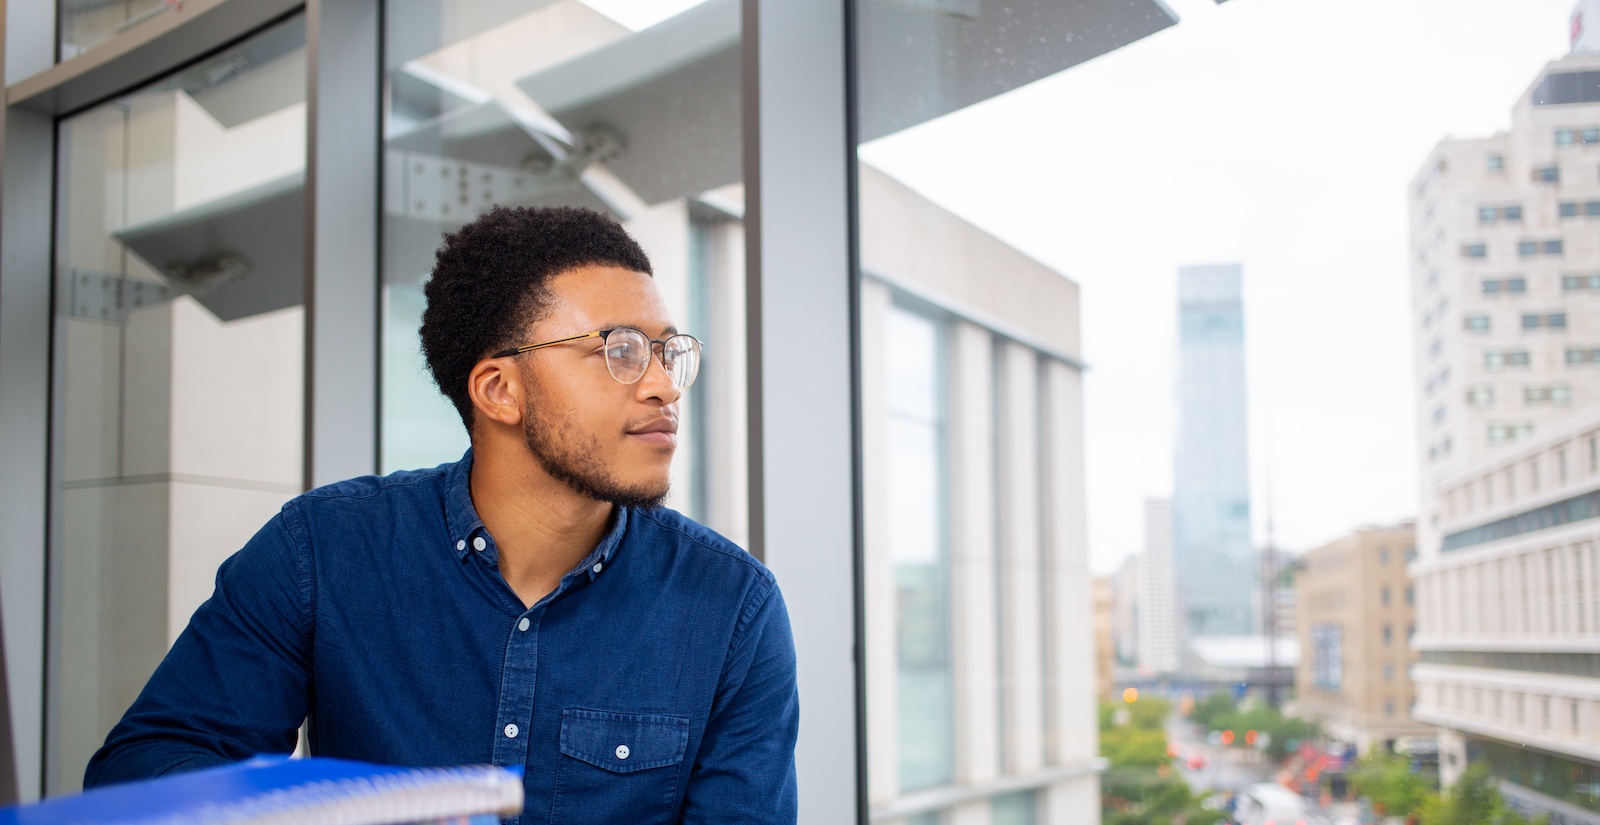 Dornsife student looks out at campus with Philly skyline in background